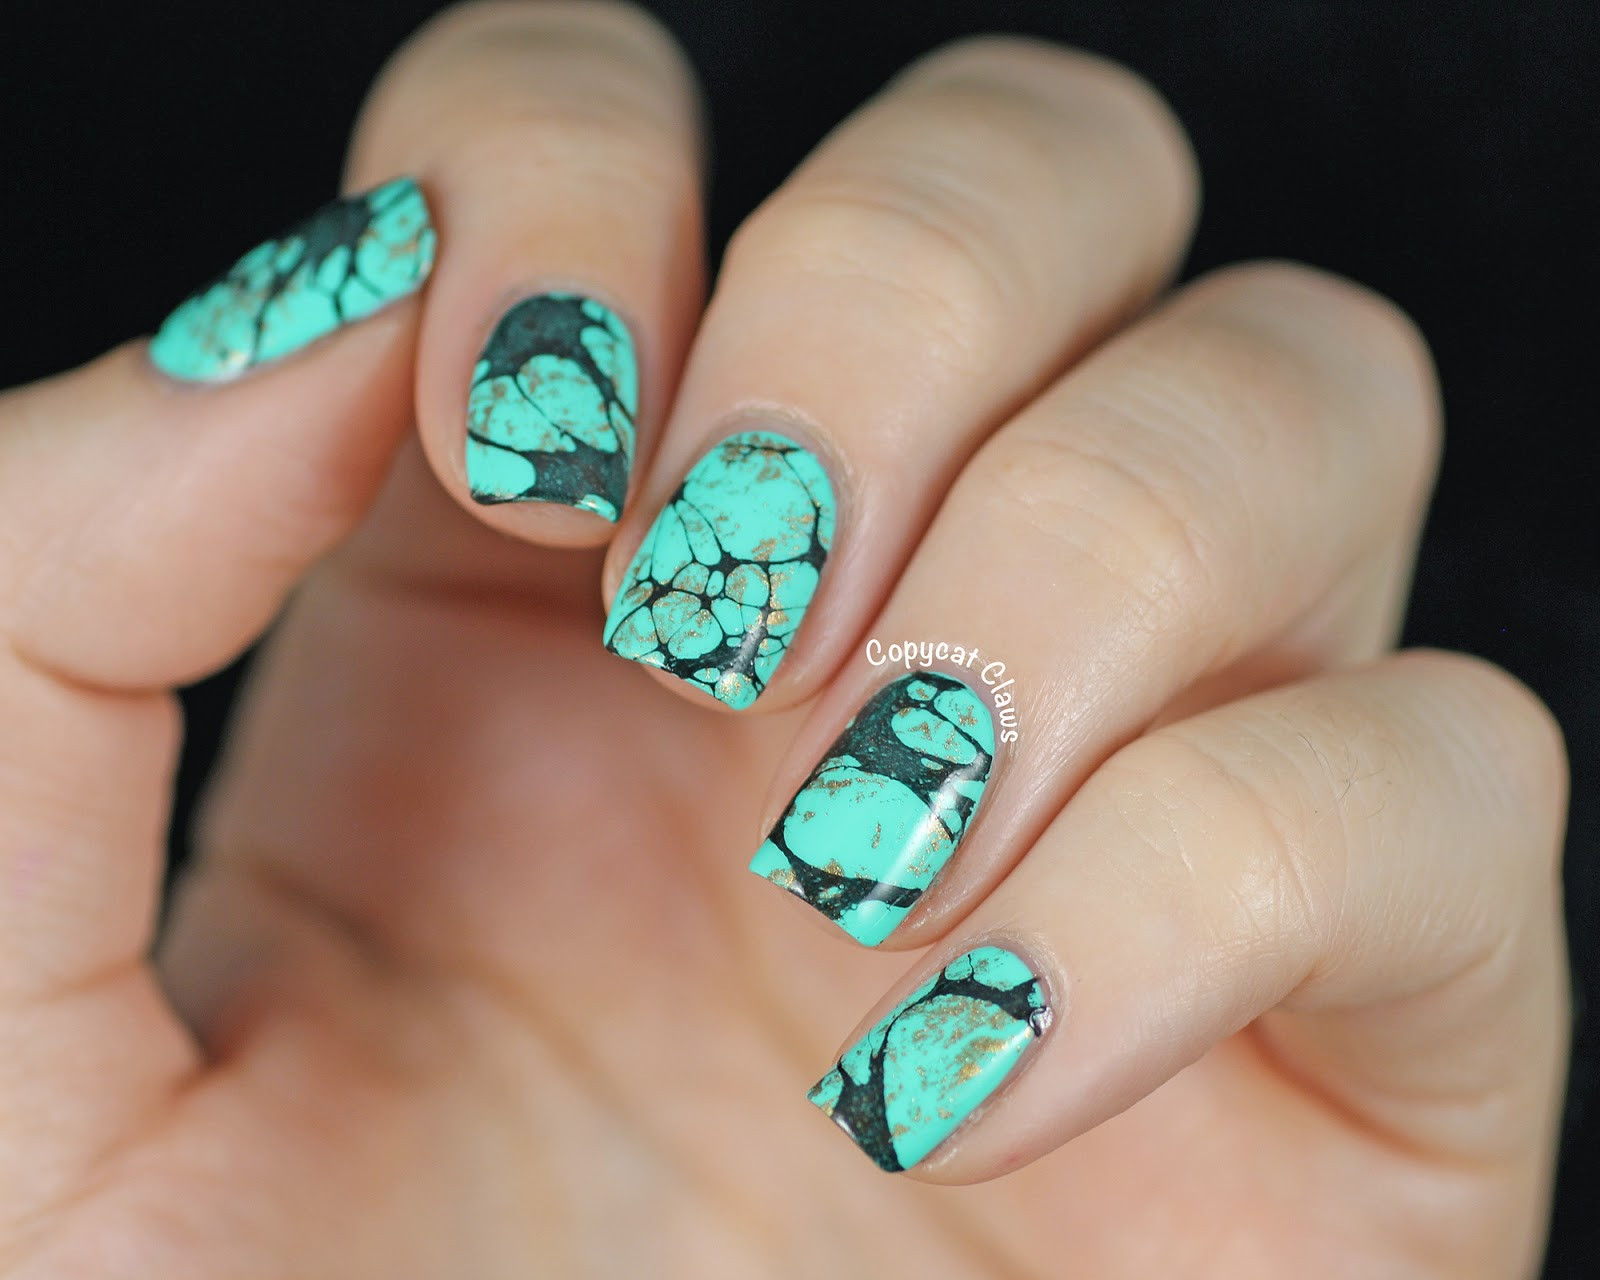 Nail Designs With Stones
 Copycat Claws Turquoise Stone Nail Art & China Glaze Too